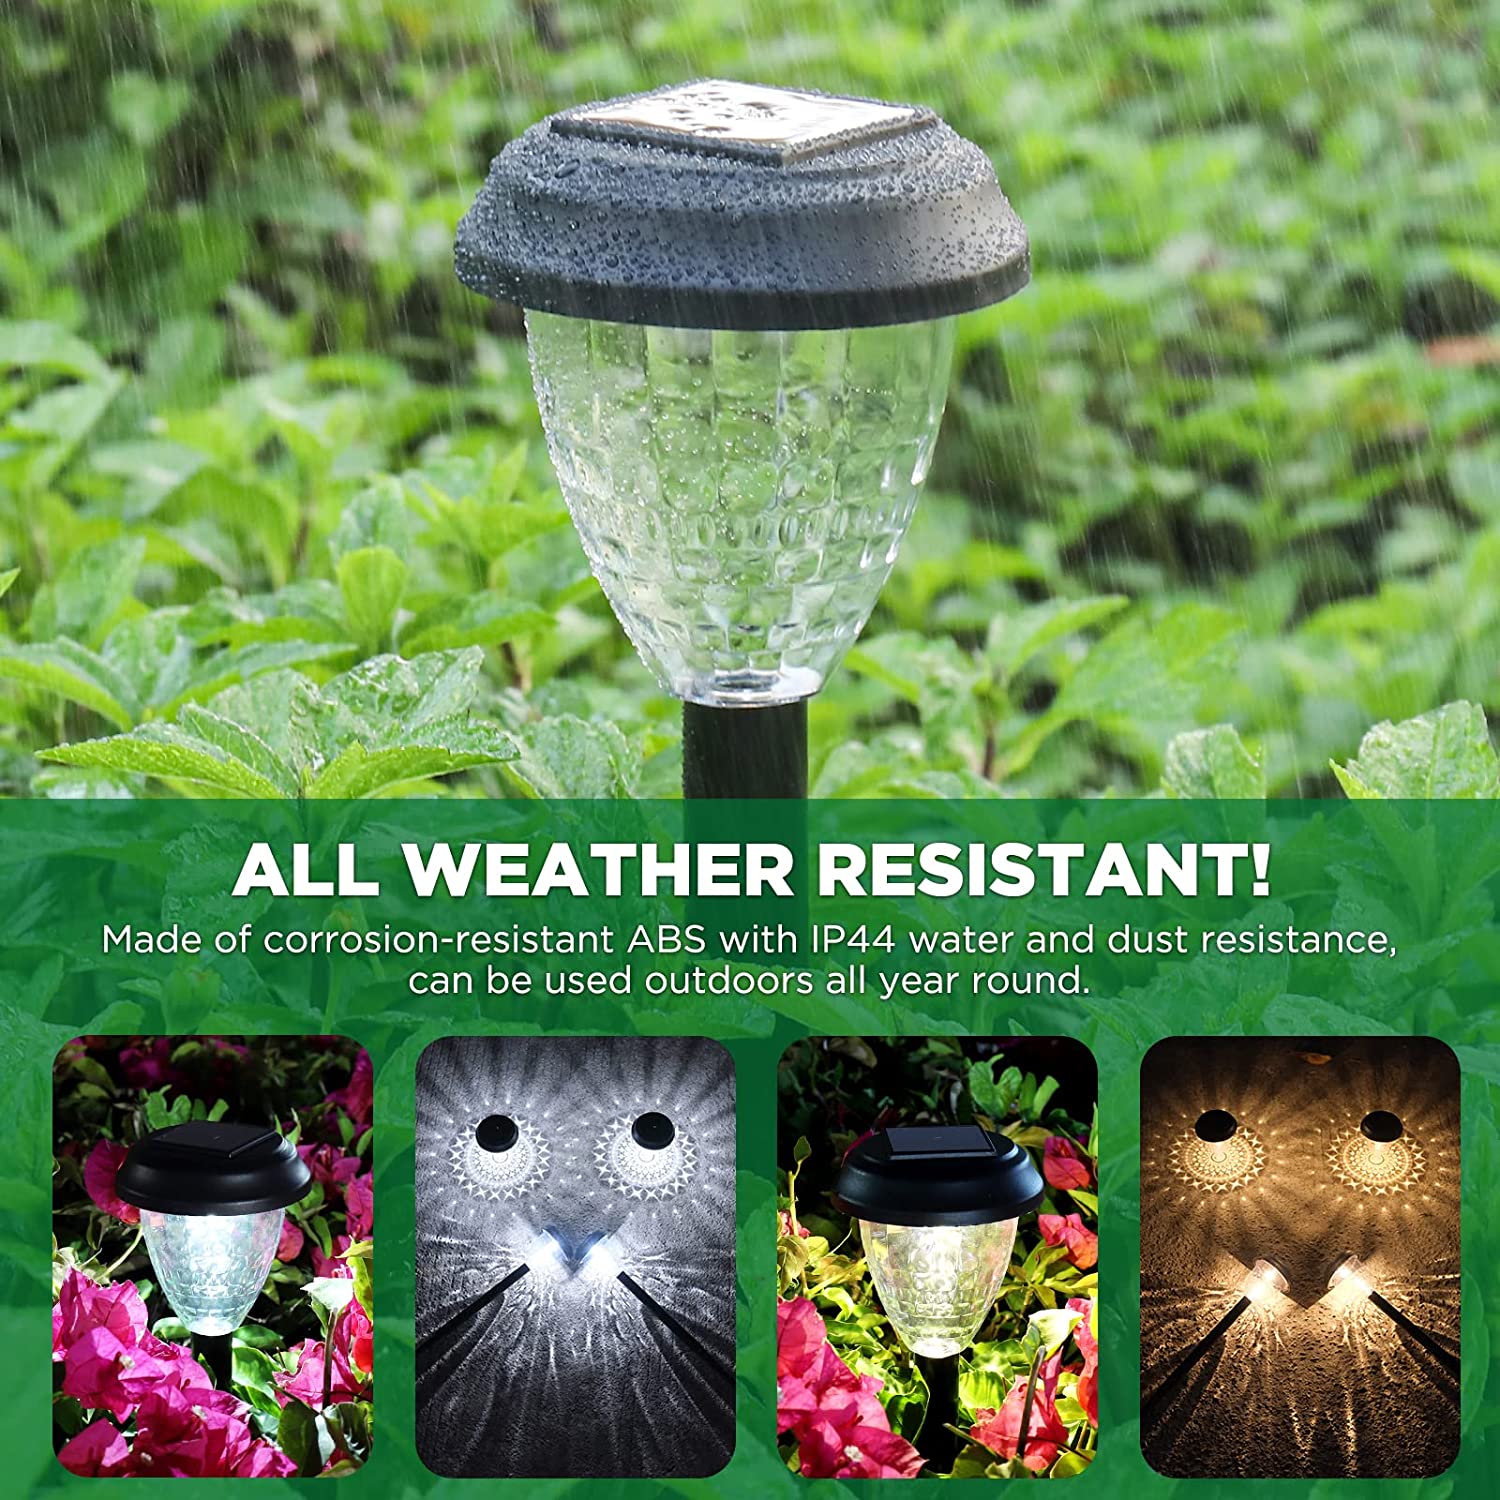 Luosen Super Bright Solar Lights Outdoor Waterproof Pack, Up to 12 Hrs Solar  Powered Outdoor Pathway Garden Lights Auto On/Off, LED Landscape Lighting  Decorative for Walkway Patio Yard